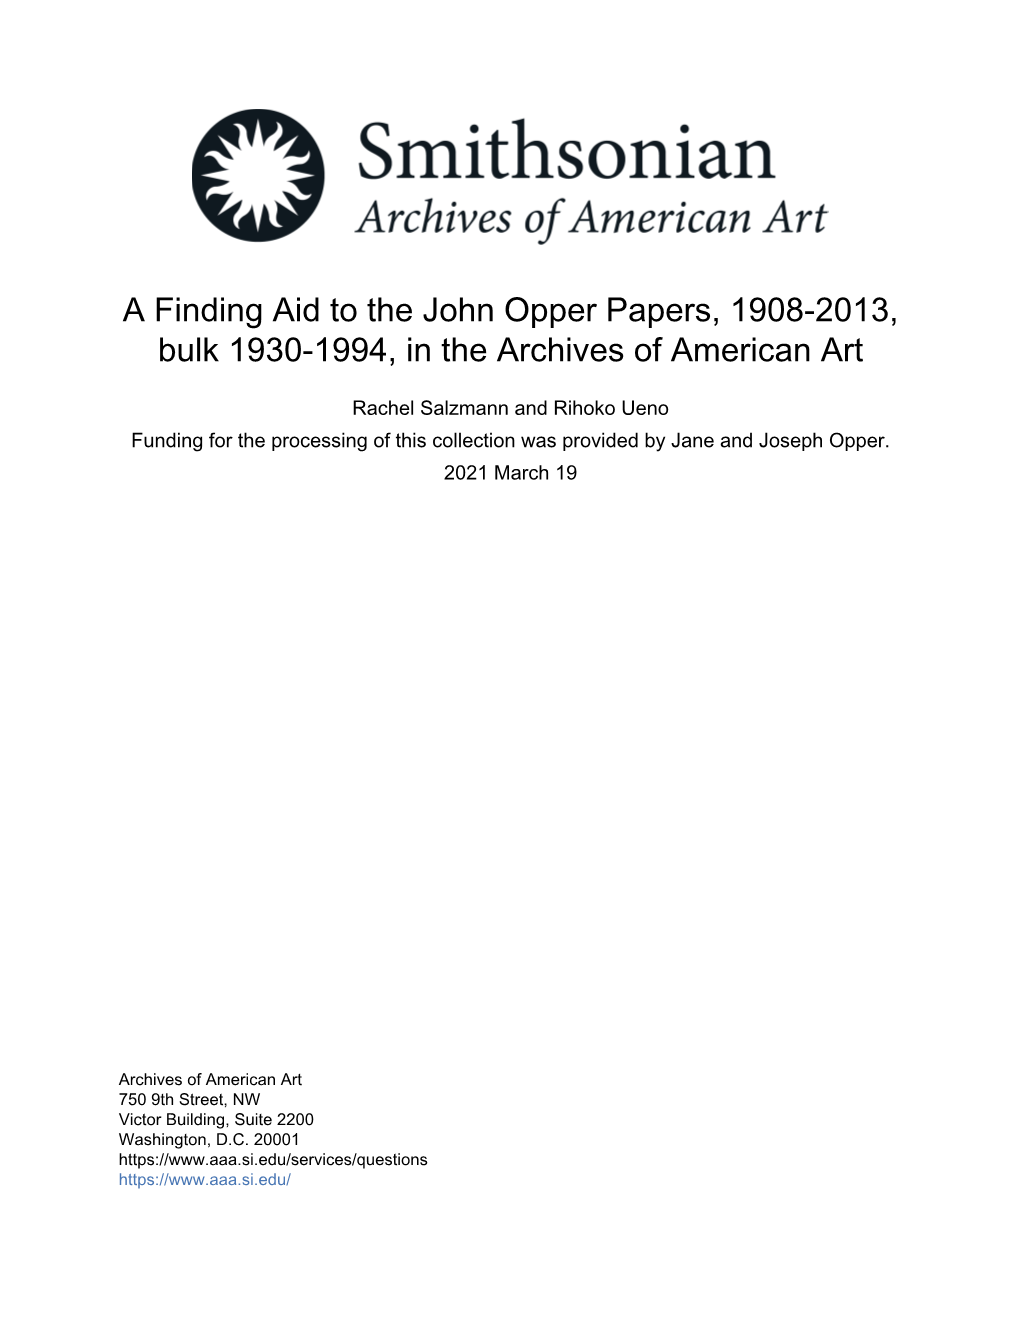 A Finding Aid to the John Opper Papers, 1908-2013, Bulk 1930-1994, in the Archives of American Art